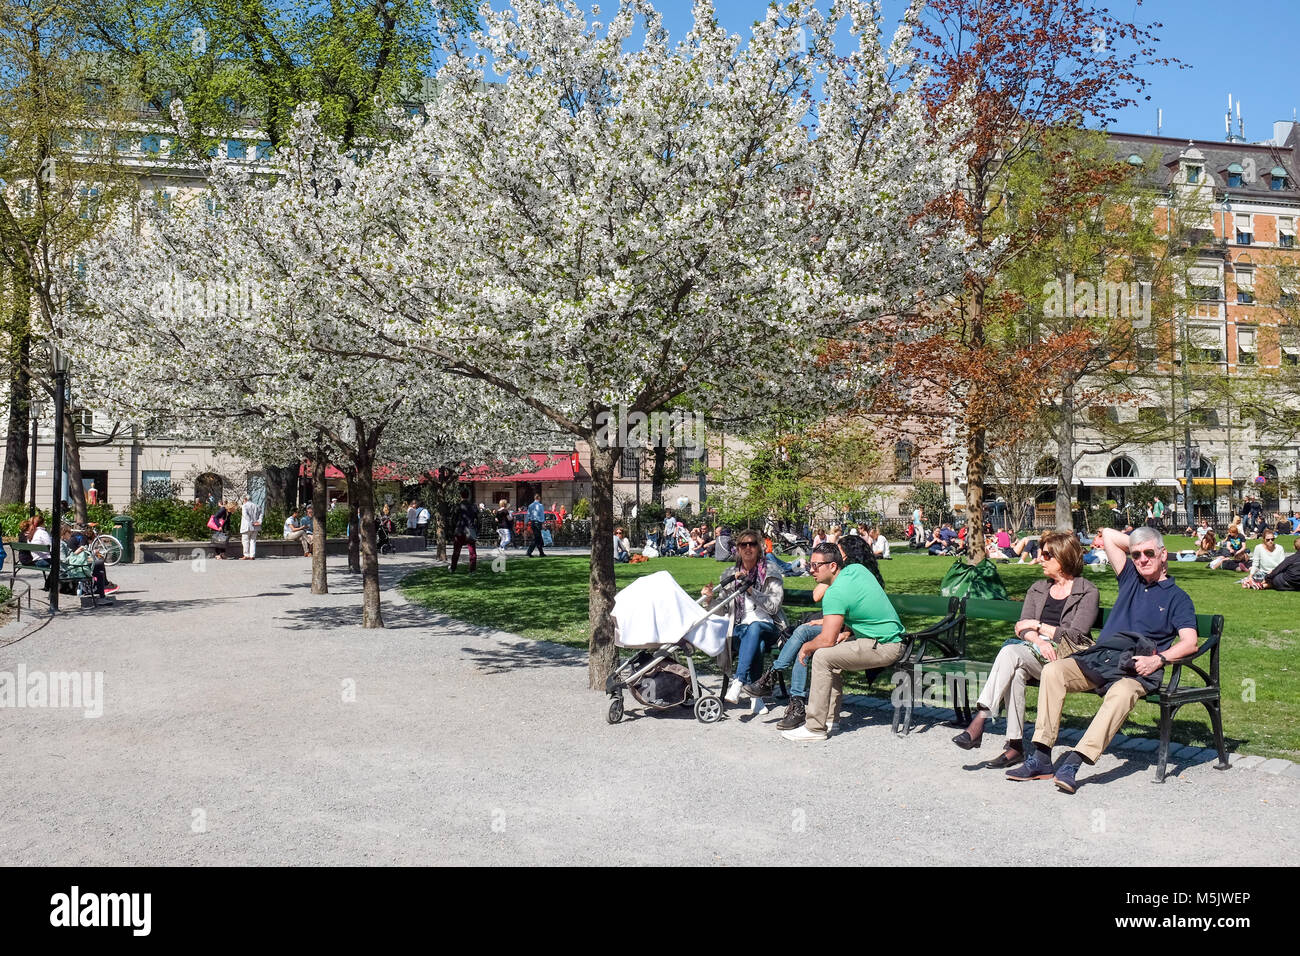 People relax in Berzelii park during springtime in Stockhom. This is one of the most central parks in the city of Stockholm Stock Photo